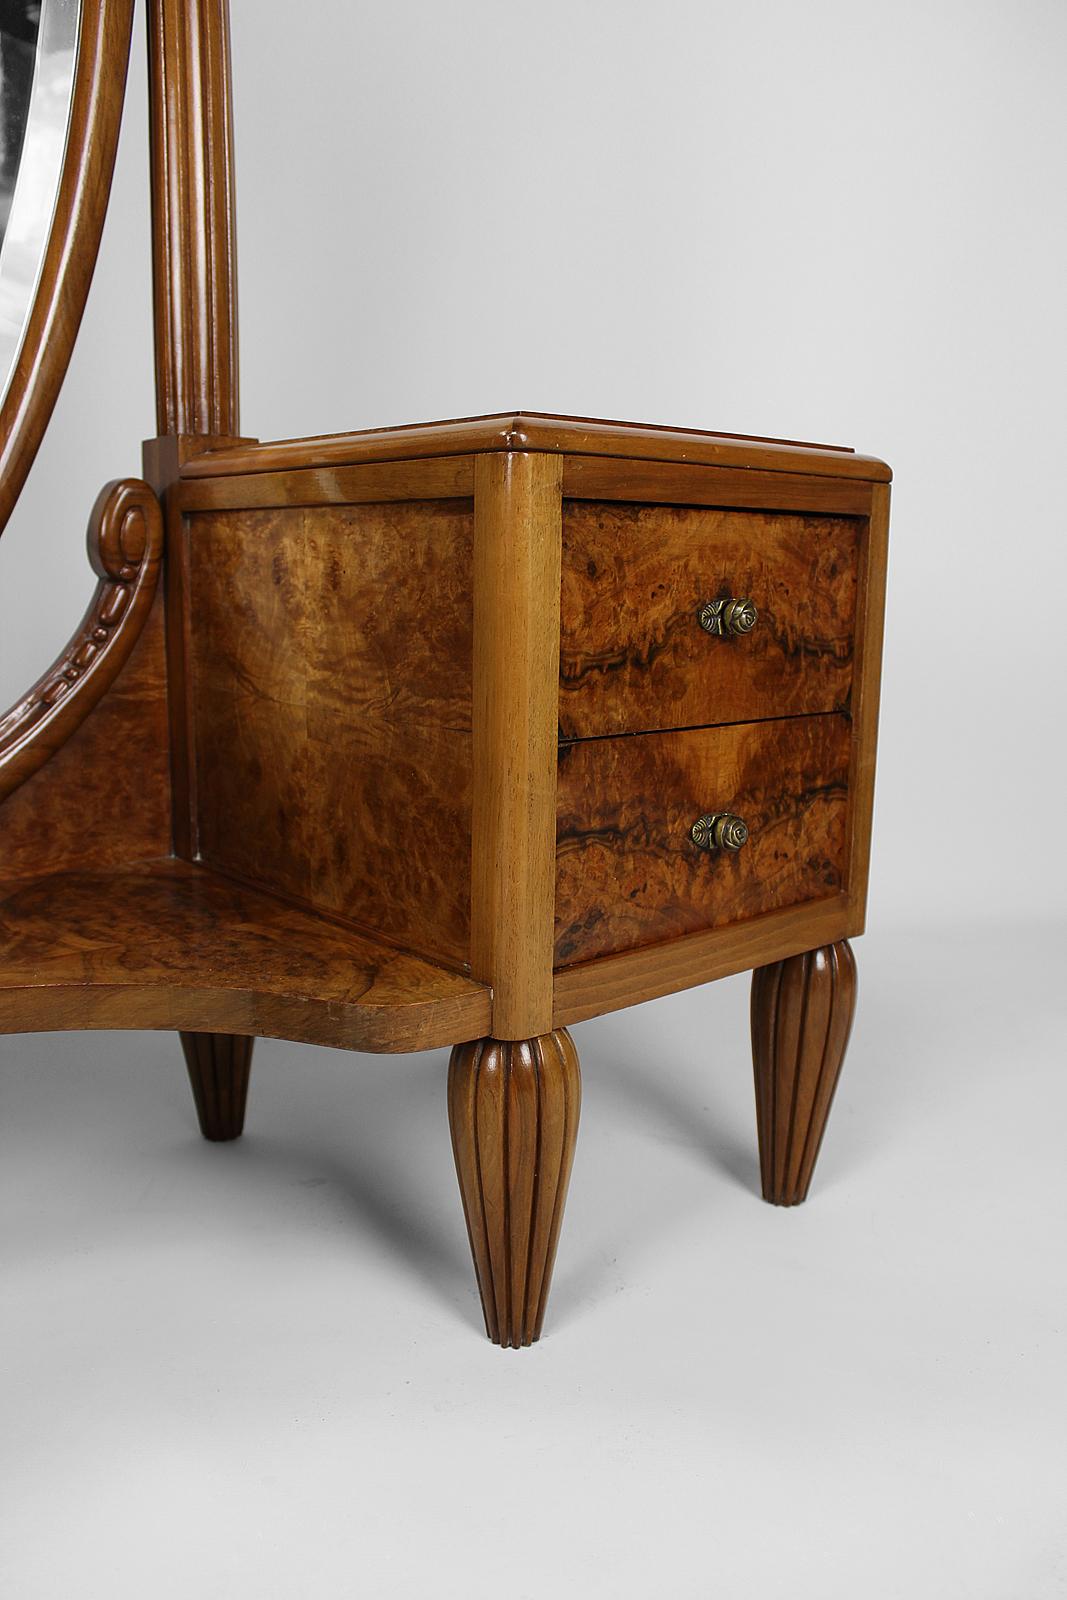 Art Deco Psyche Dressing Table and Pouf by Ateliers Gauthier-Poinsignon, c. 1920 For Sale 6